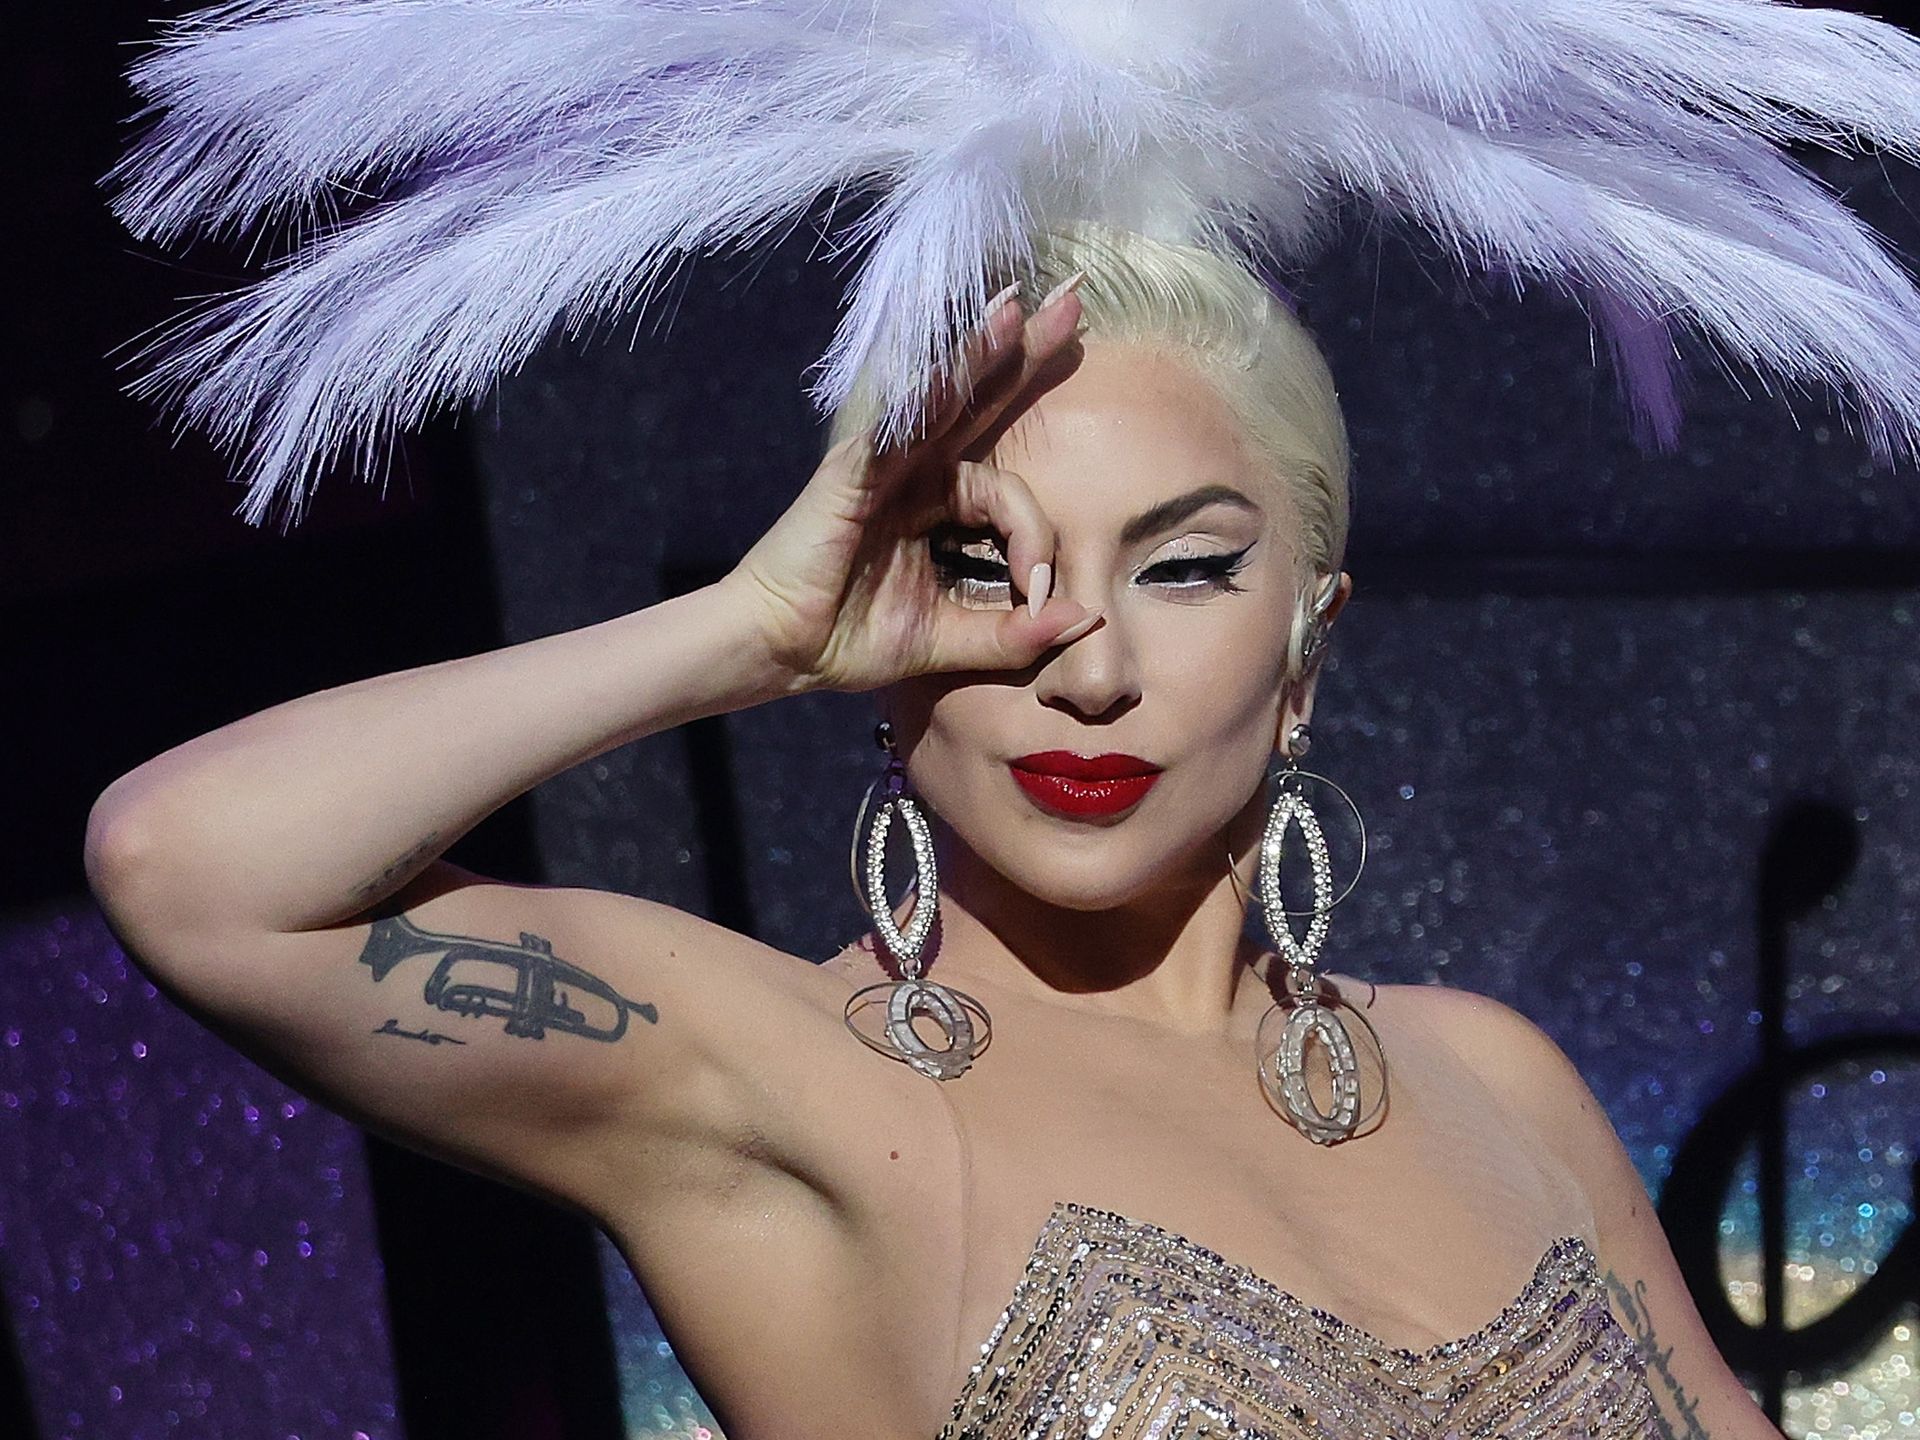 Lady Gaga Is Back in Las Vegas! An Up-Close Look at Her Residency